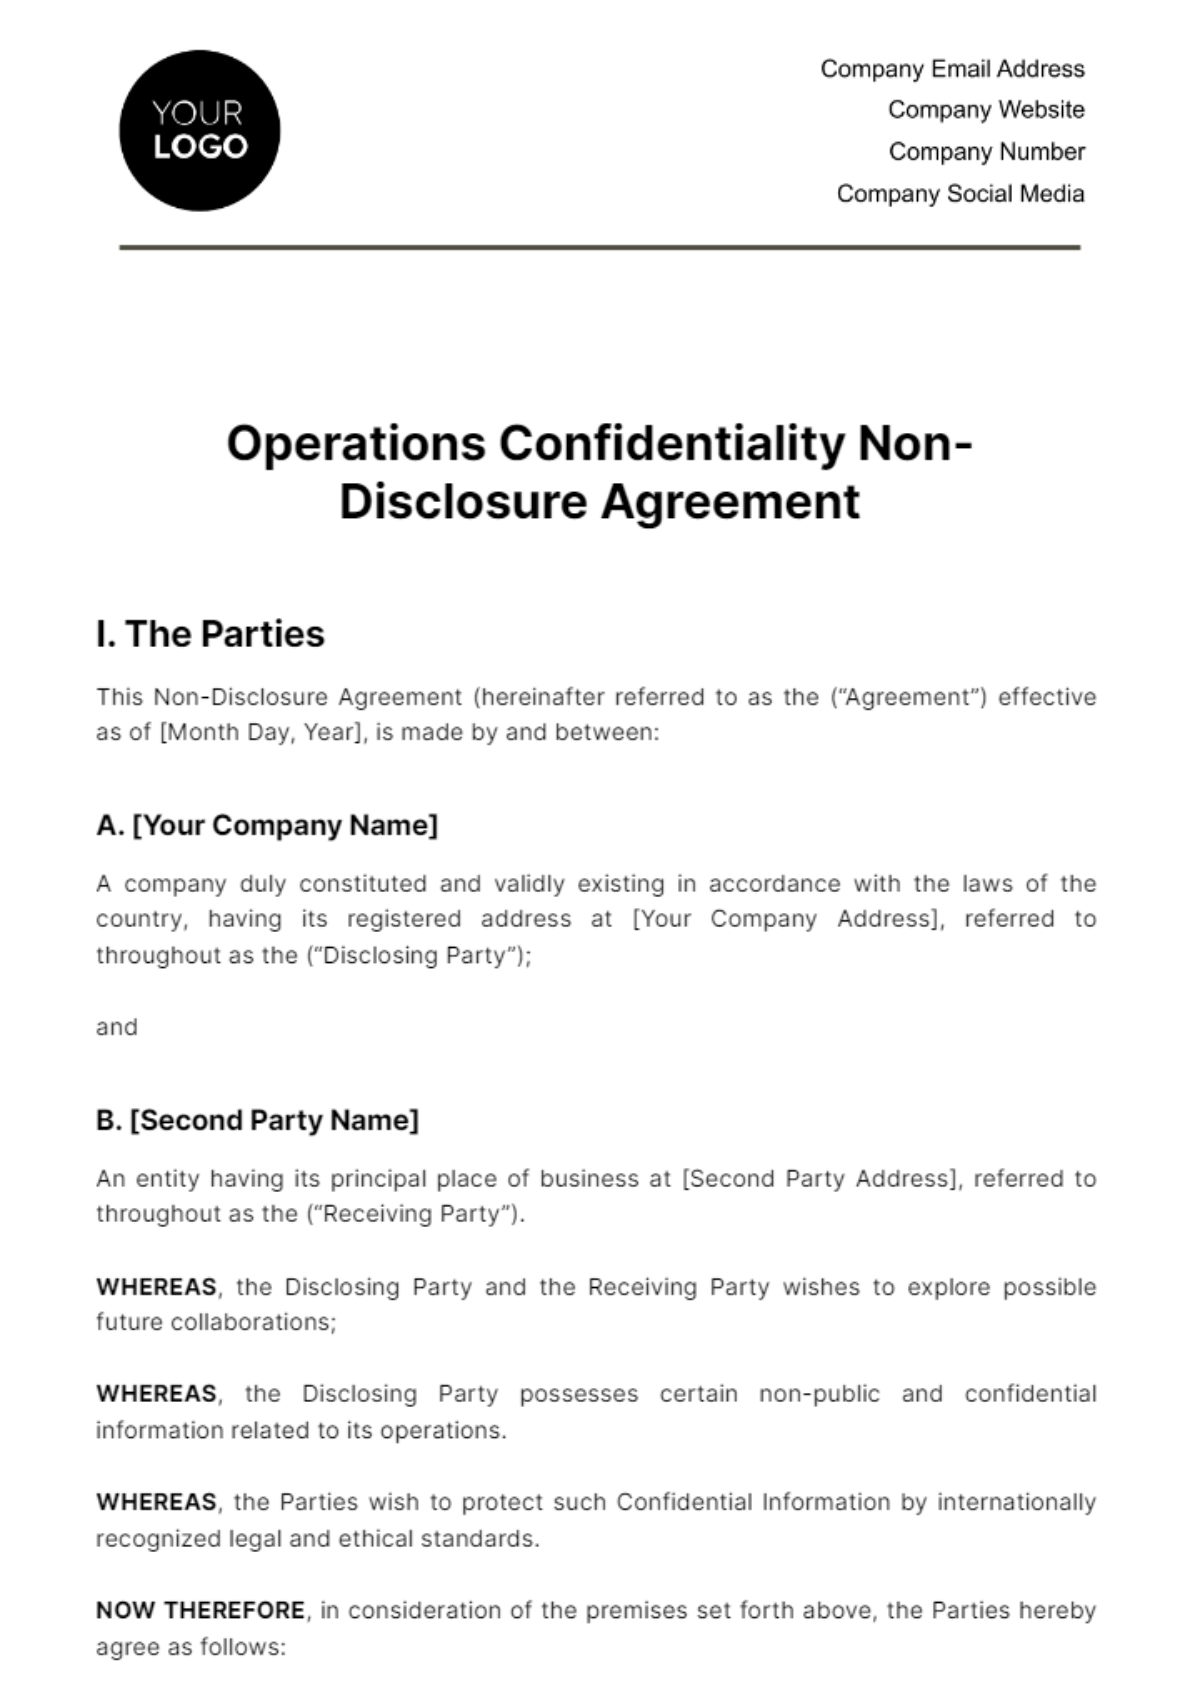 Operations Confidentiality (NDA) Agreement Template